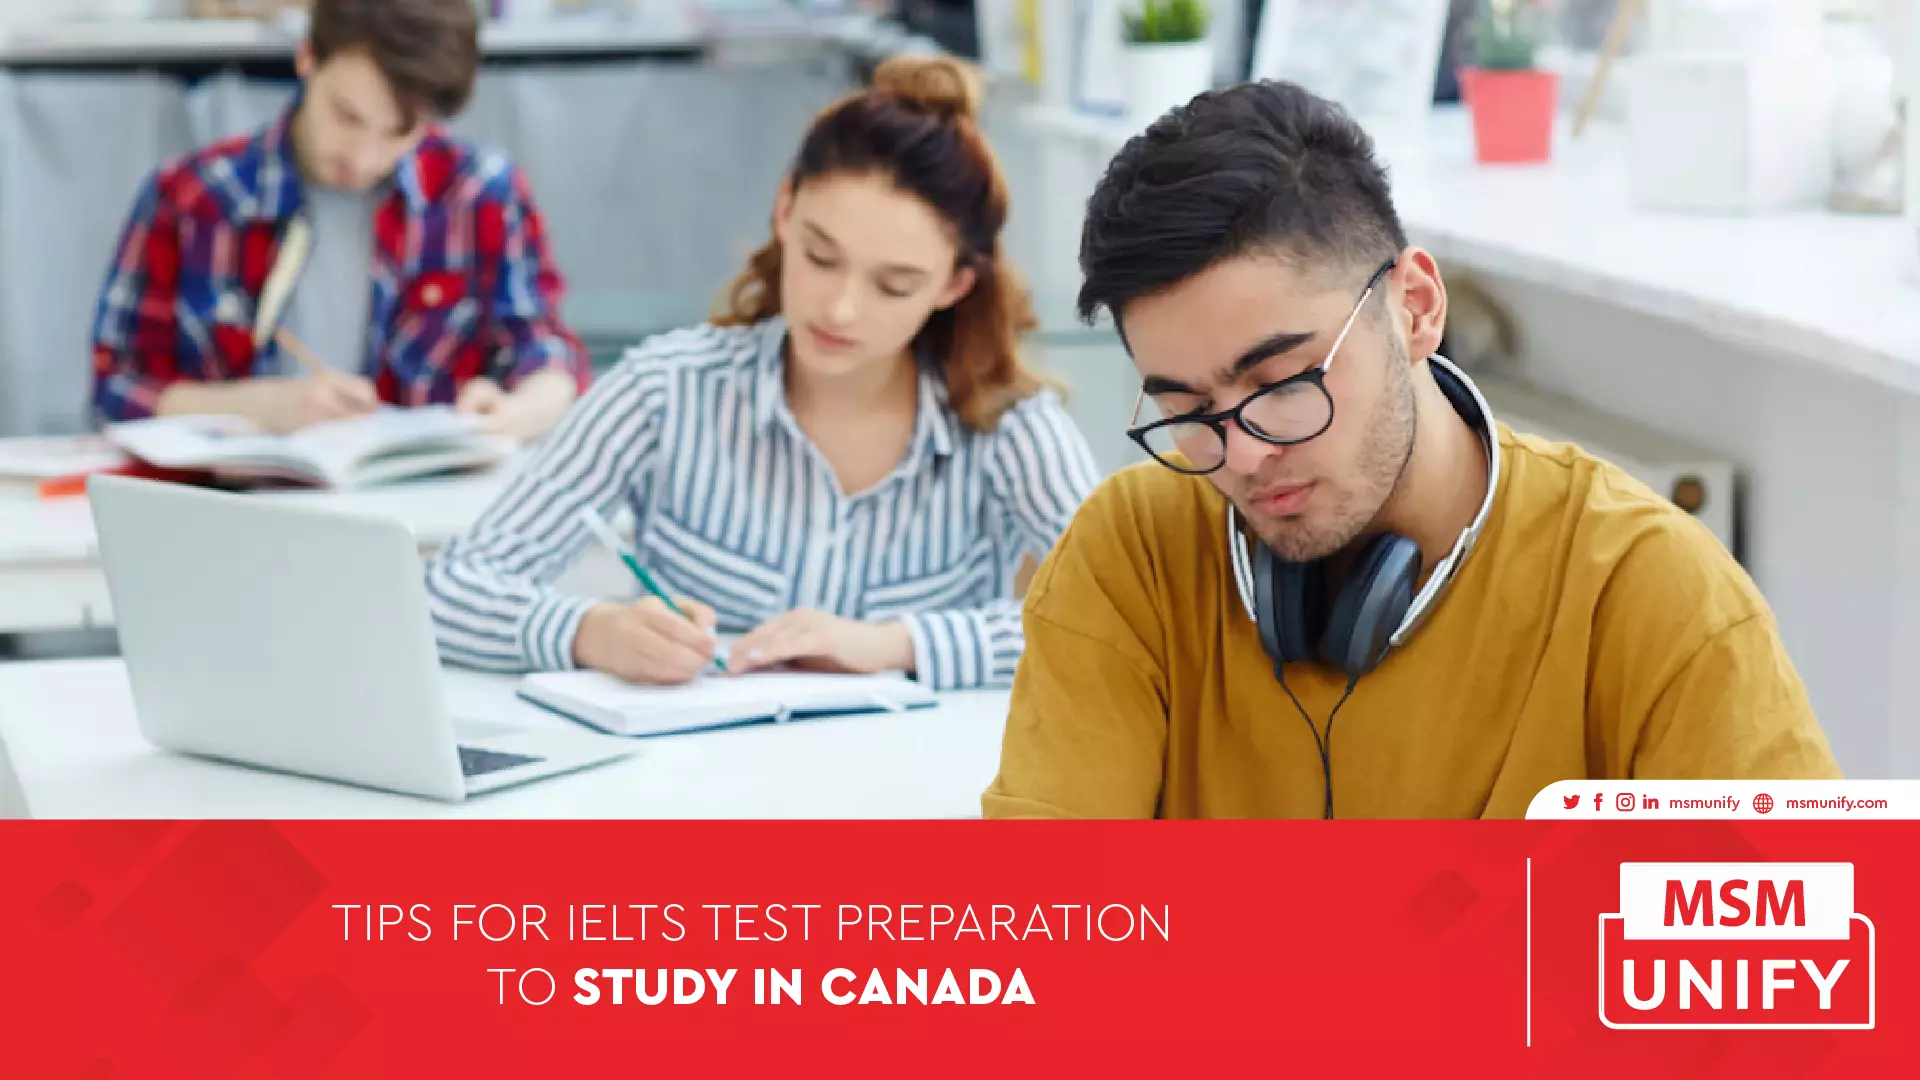 010623 MSM Unify Tips for IELTS Test Preparation to stuydy in Canada 01